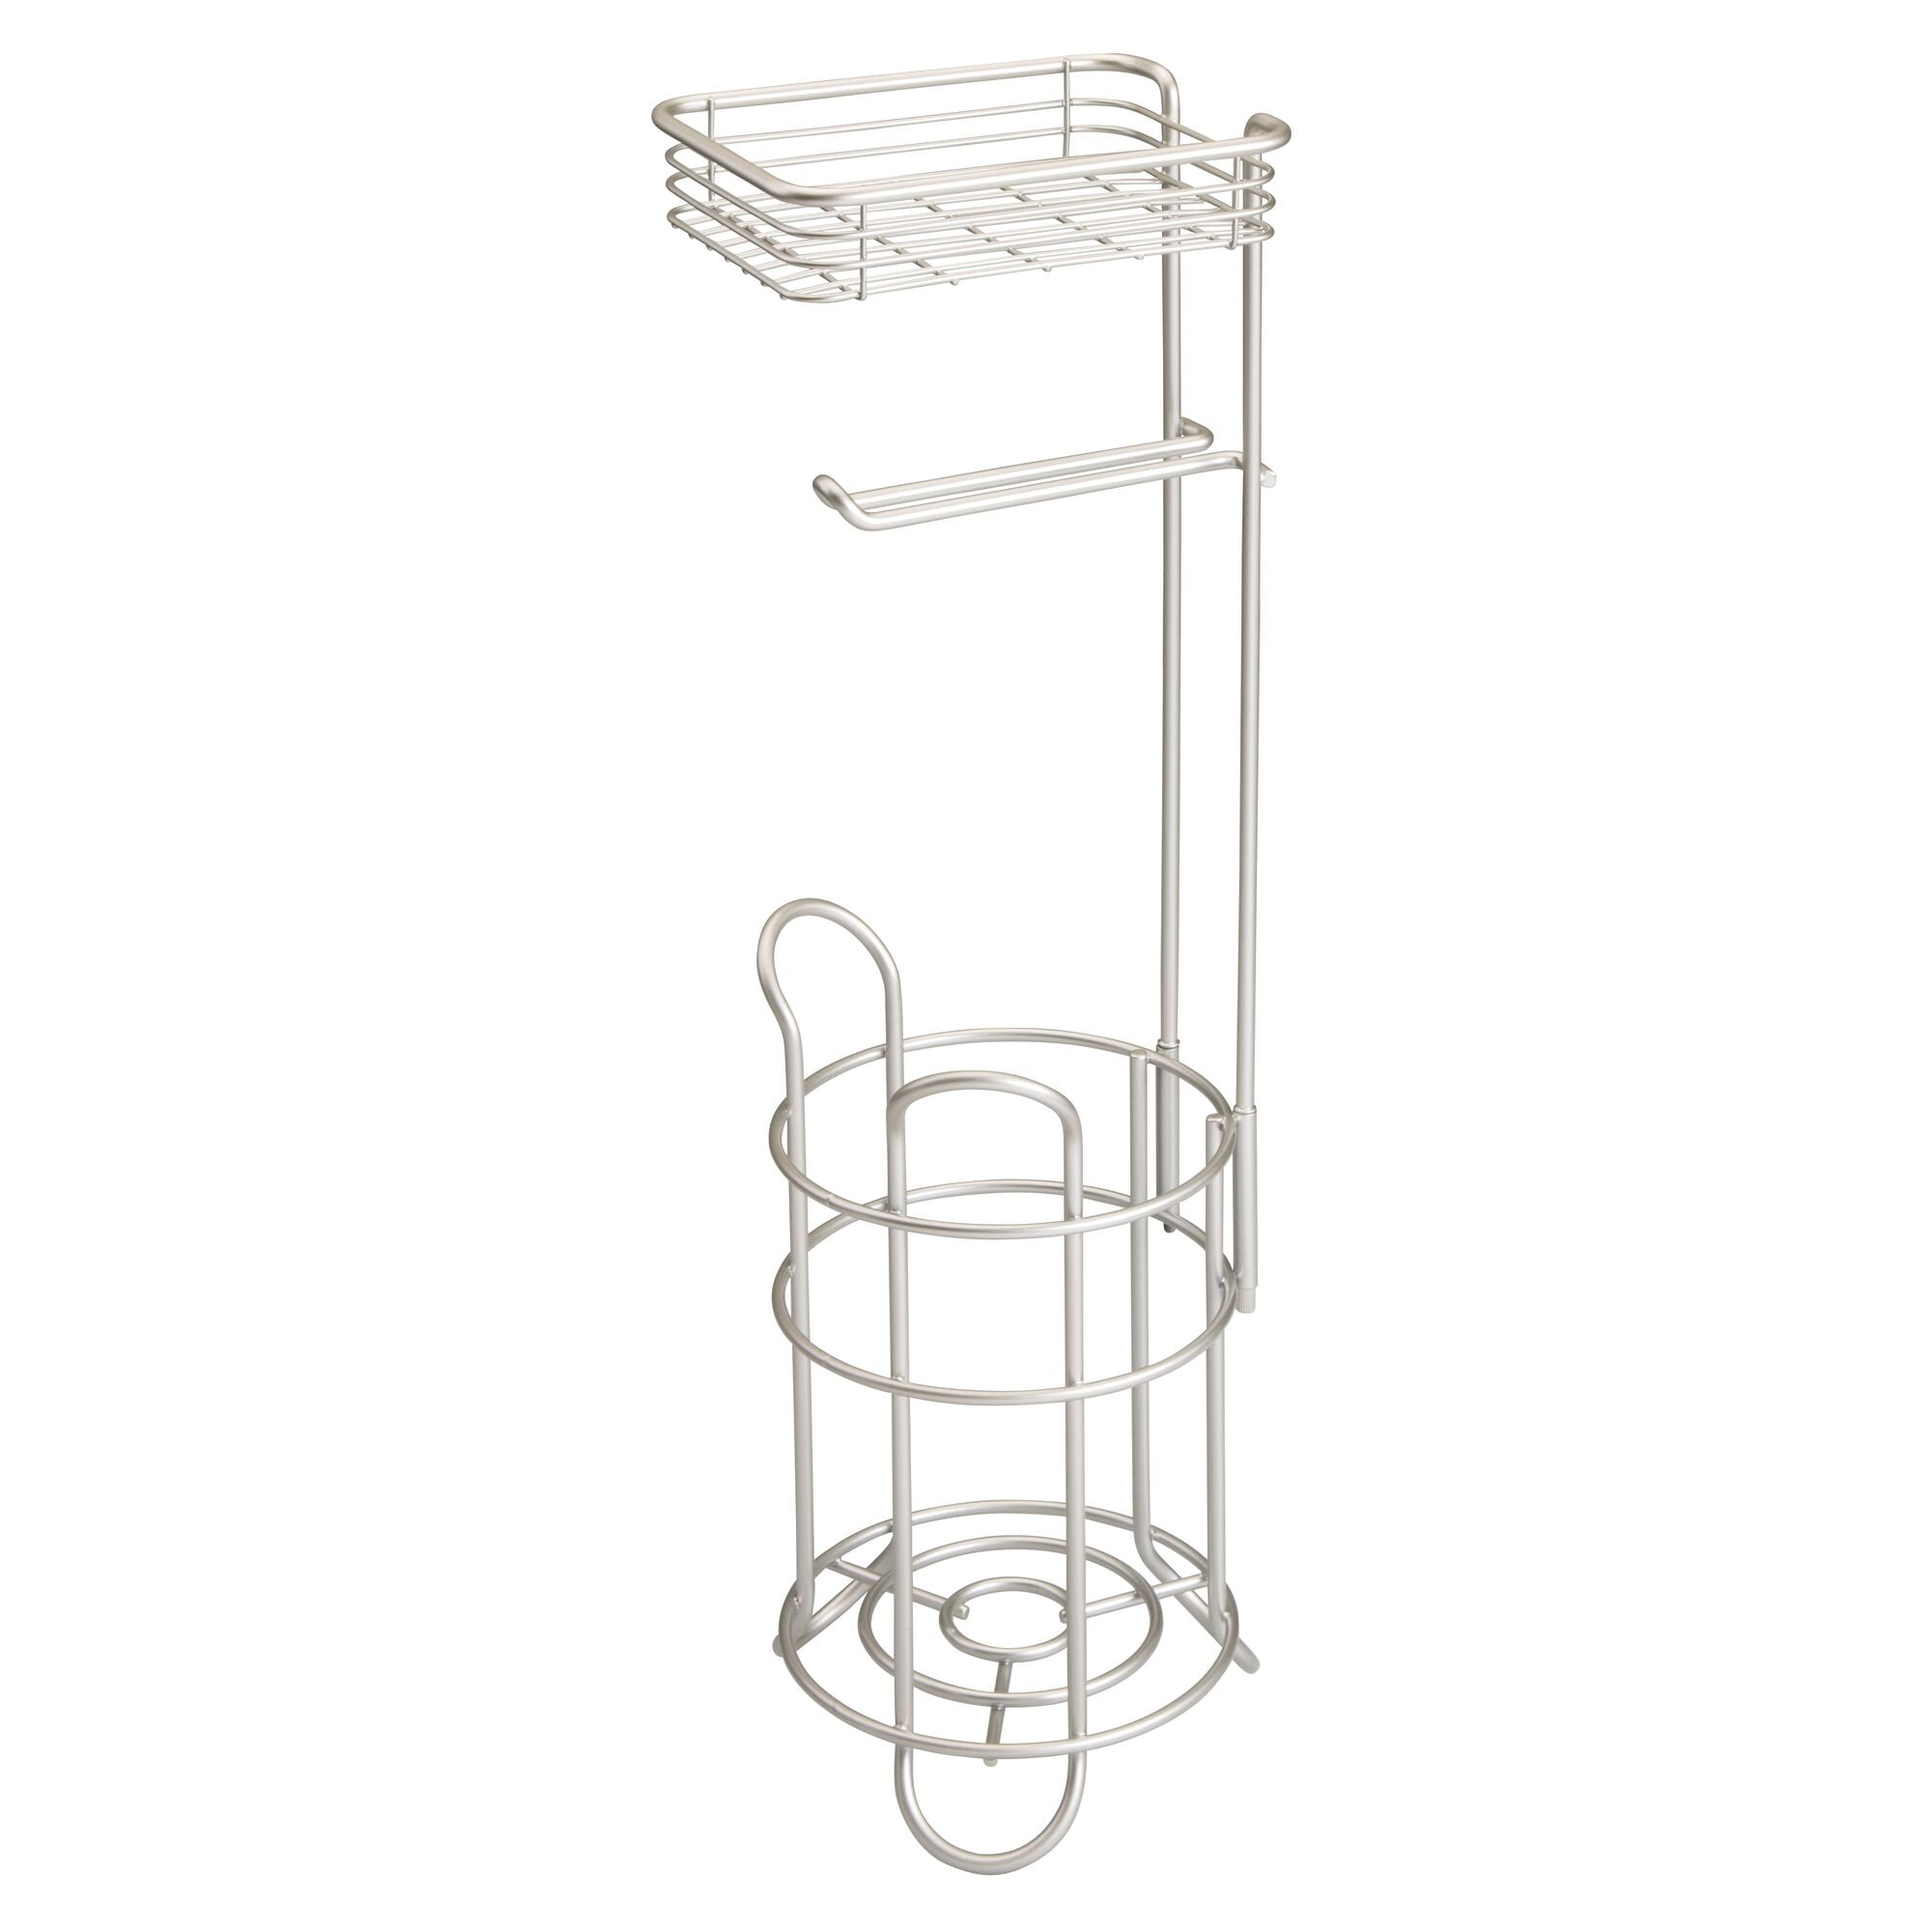 MetroDecor mDesign Freestanding Metal Wire Toilet Paper Roll Holder Stand and 